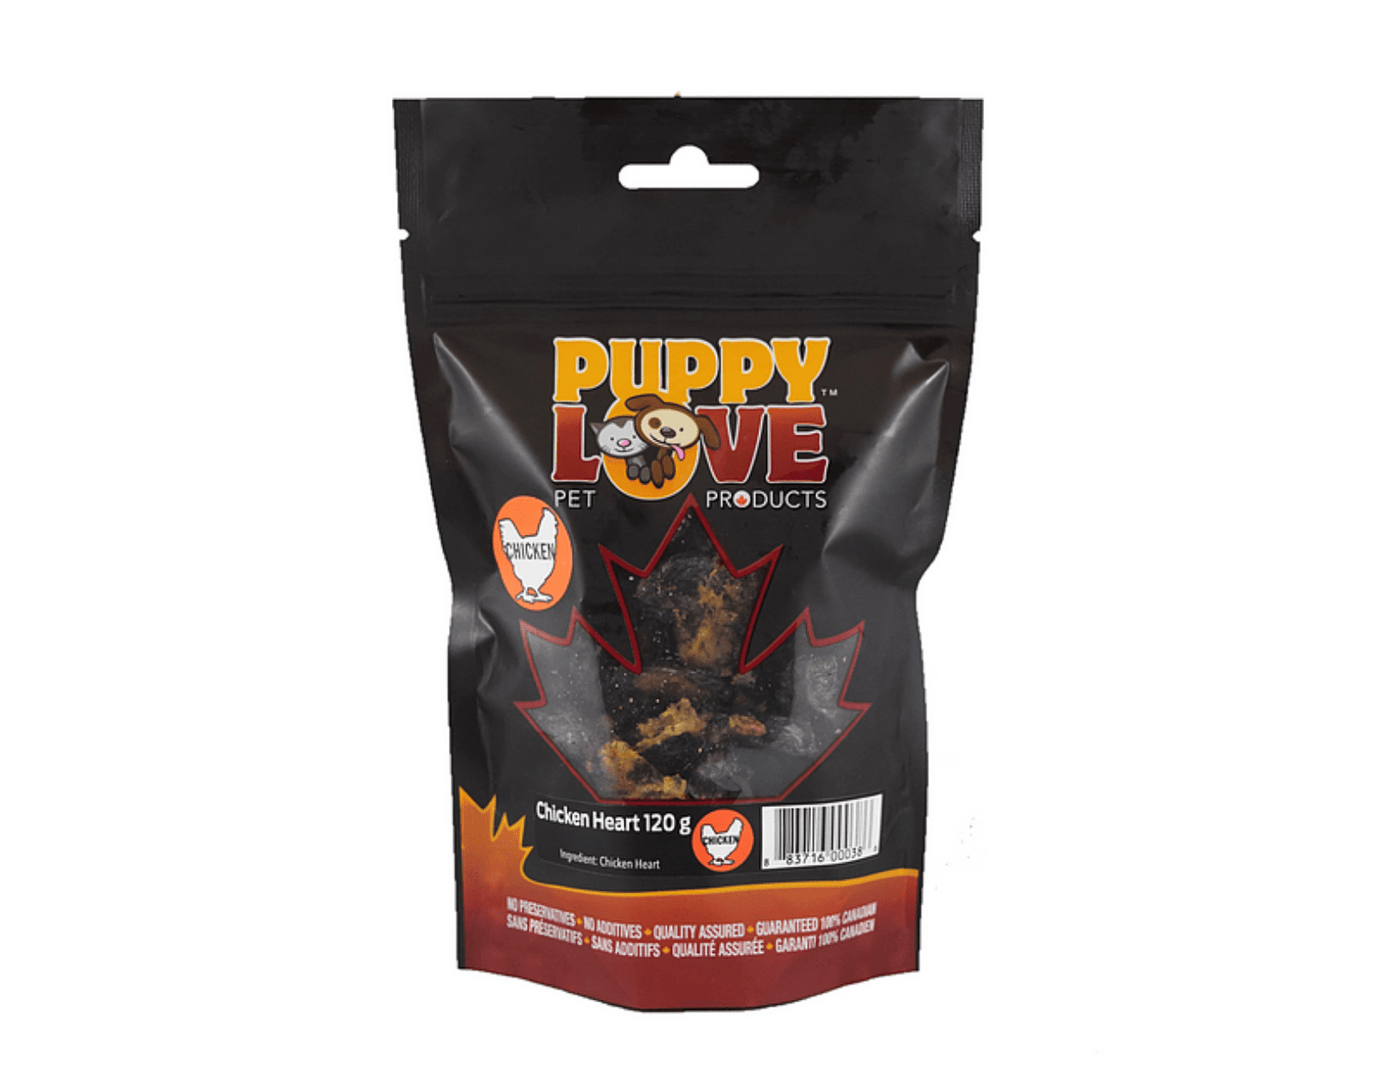 Puppy love - Chicken Heart 120 gm  for Cats & Dogs